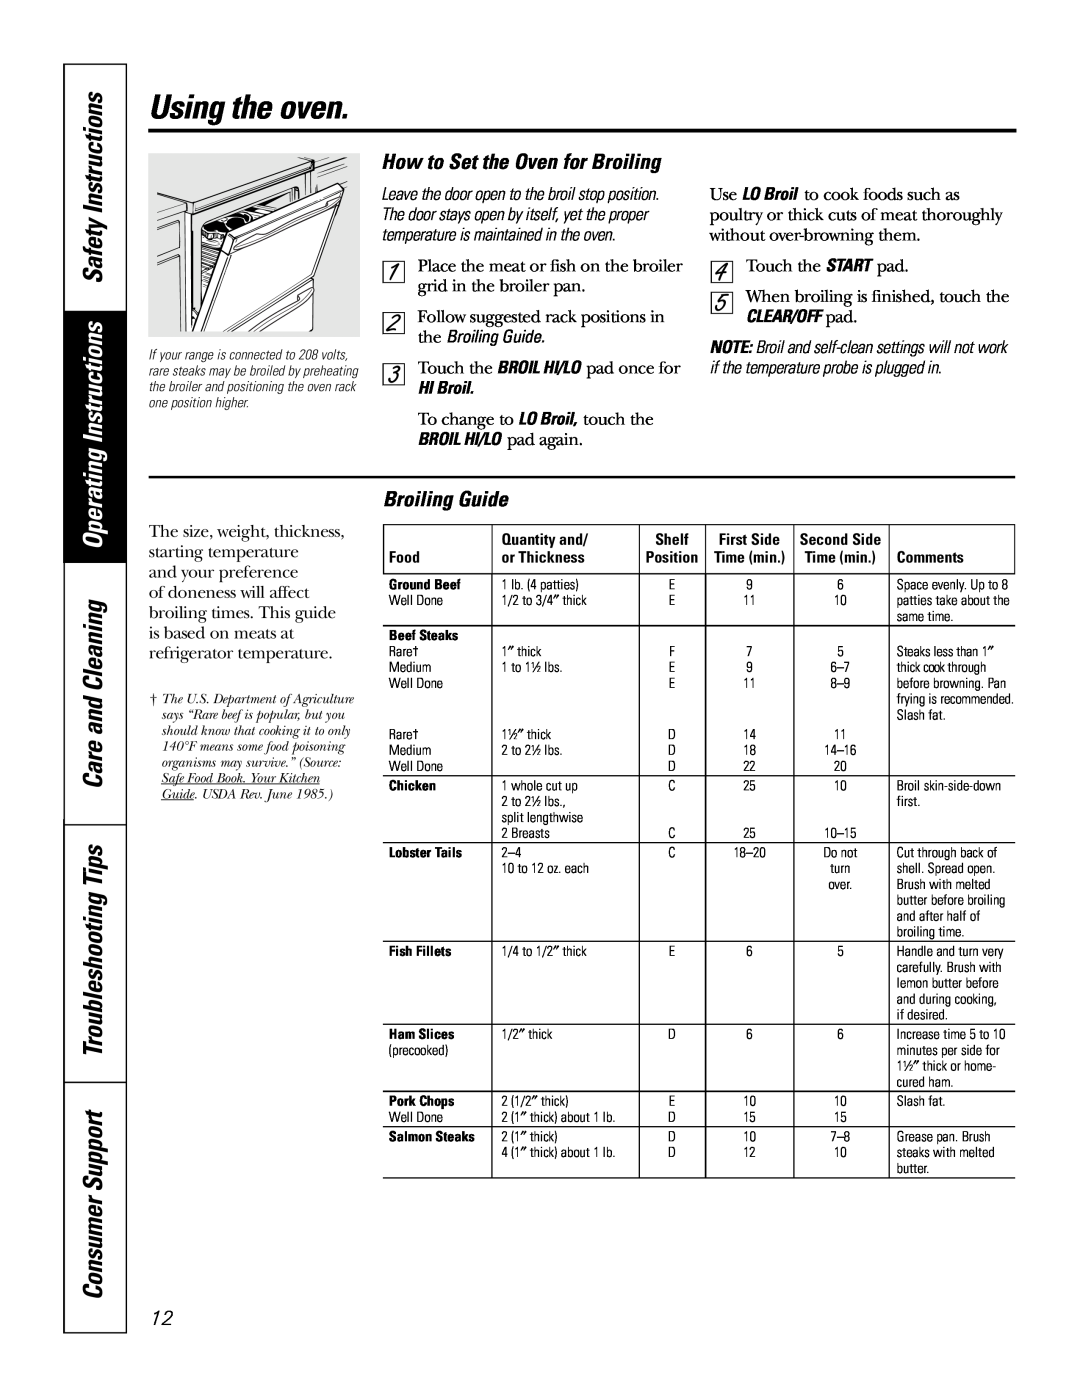 GE JB910 owner manual Operating, How to Set the Oven for Broiling, Broiling Guide, Using the oven, Instructions Safety 